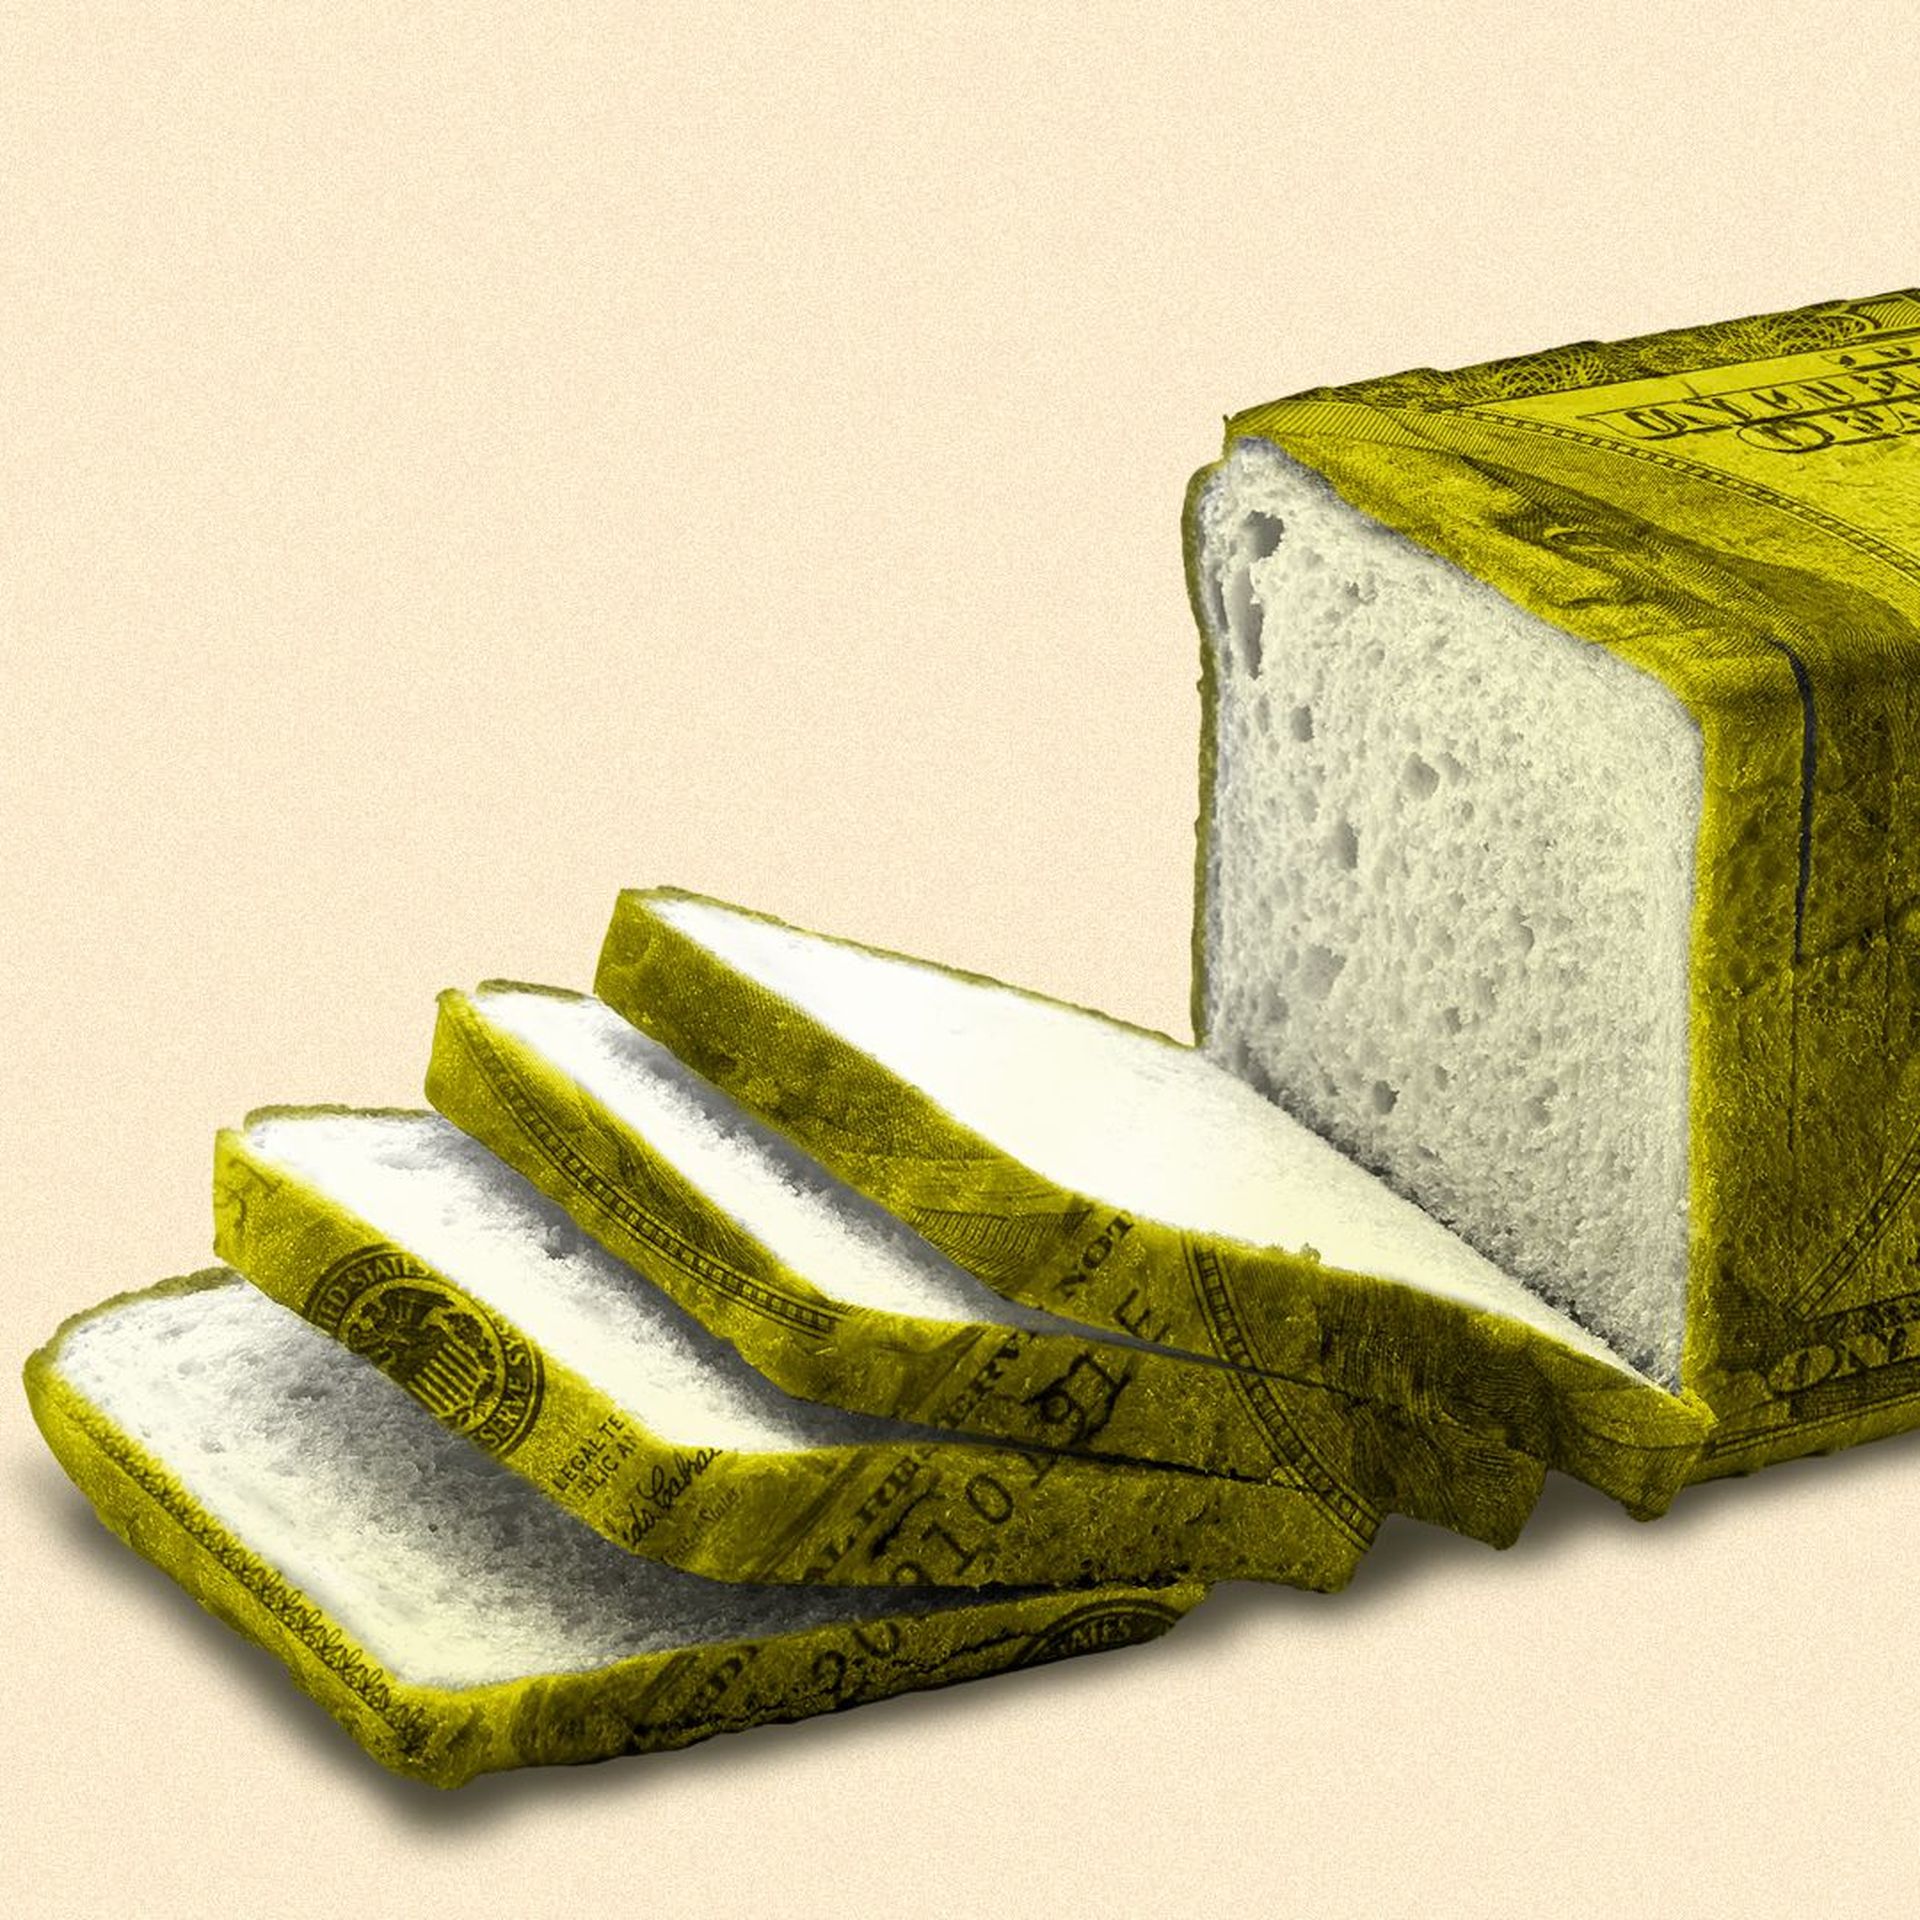 Illustration of a hundred dollar bill in the shape of a loaf of bread